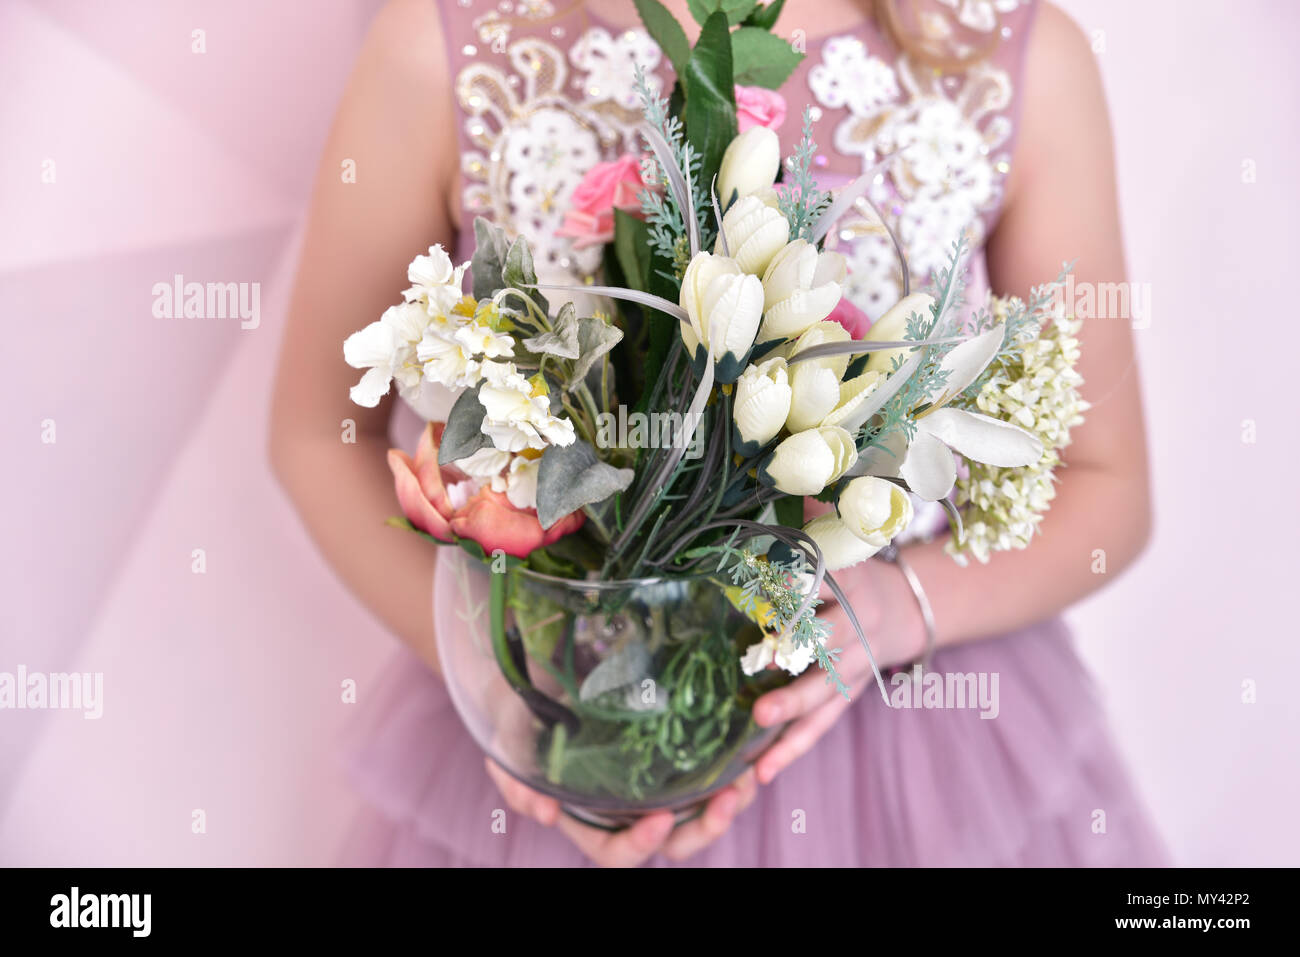 little girl with artificial flowers, close-up view Stock Photo